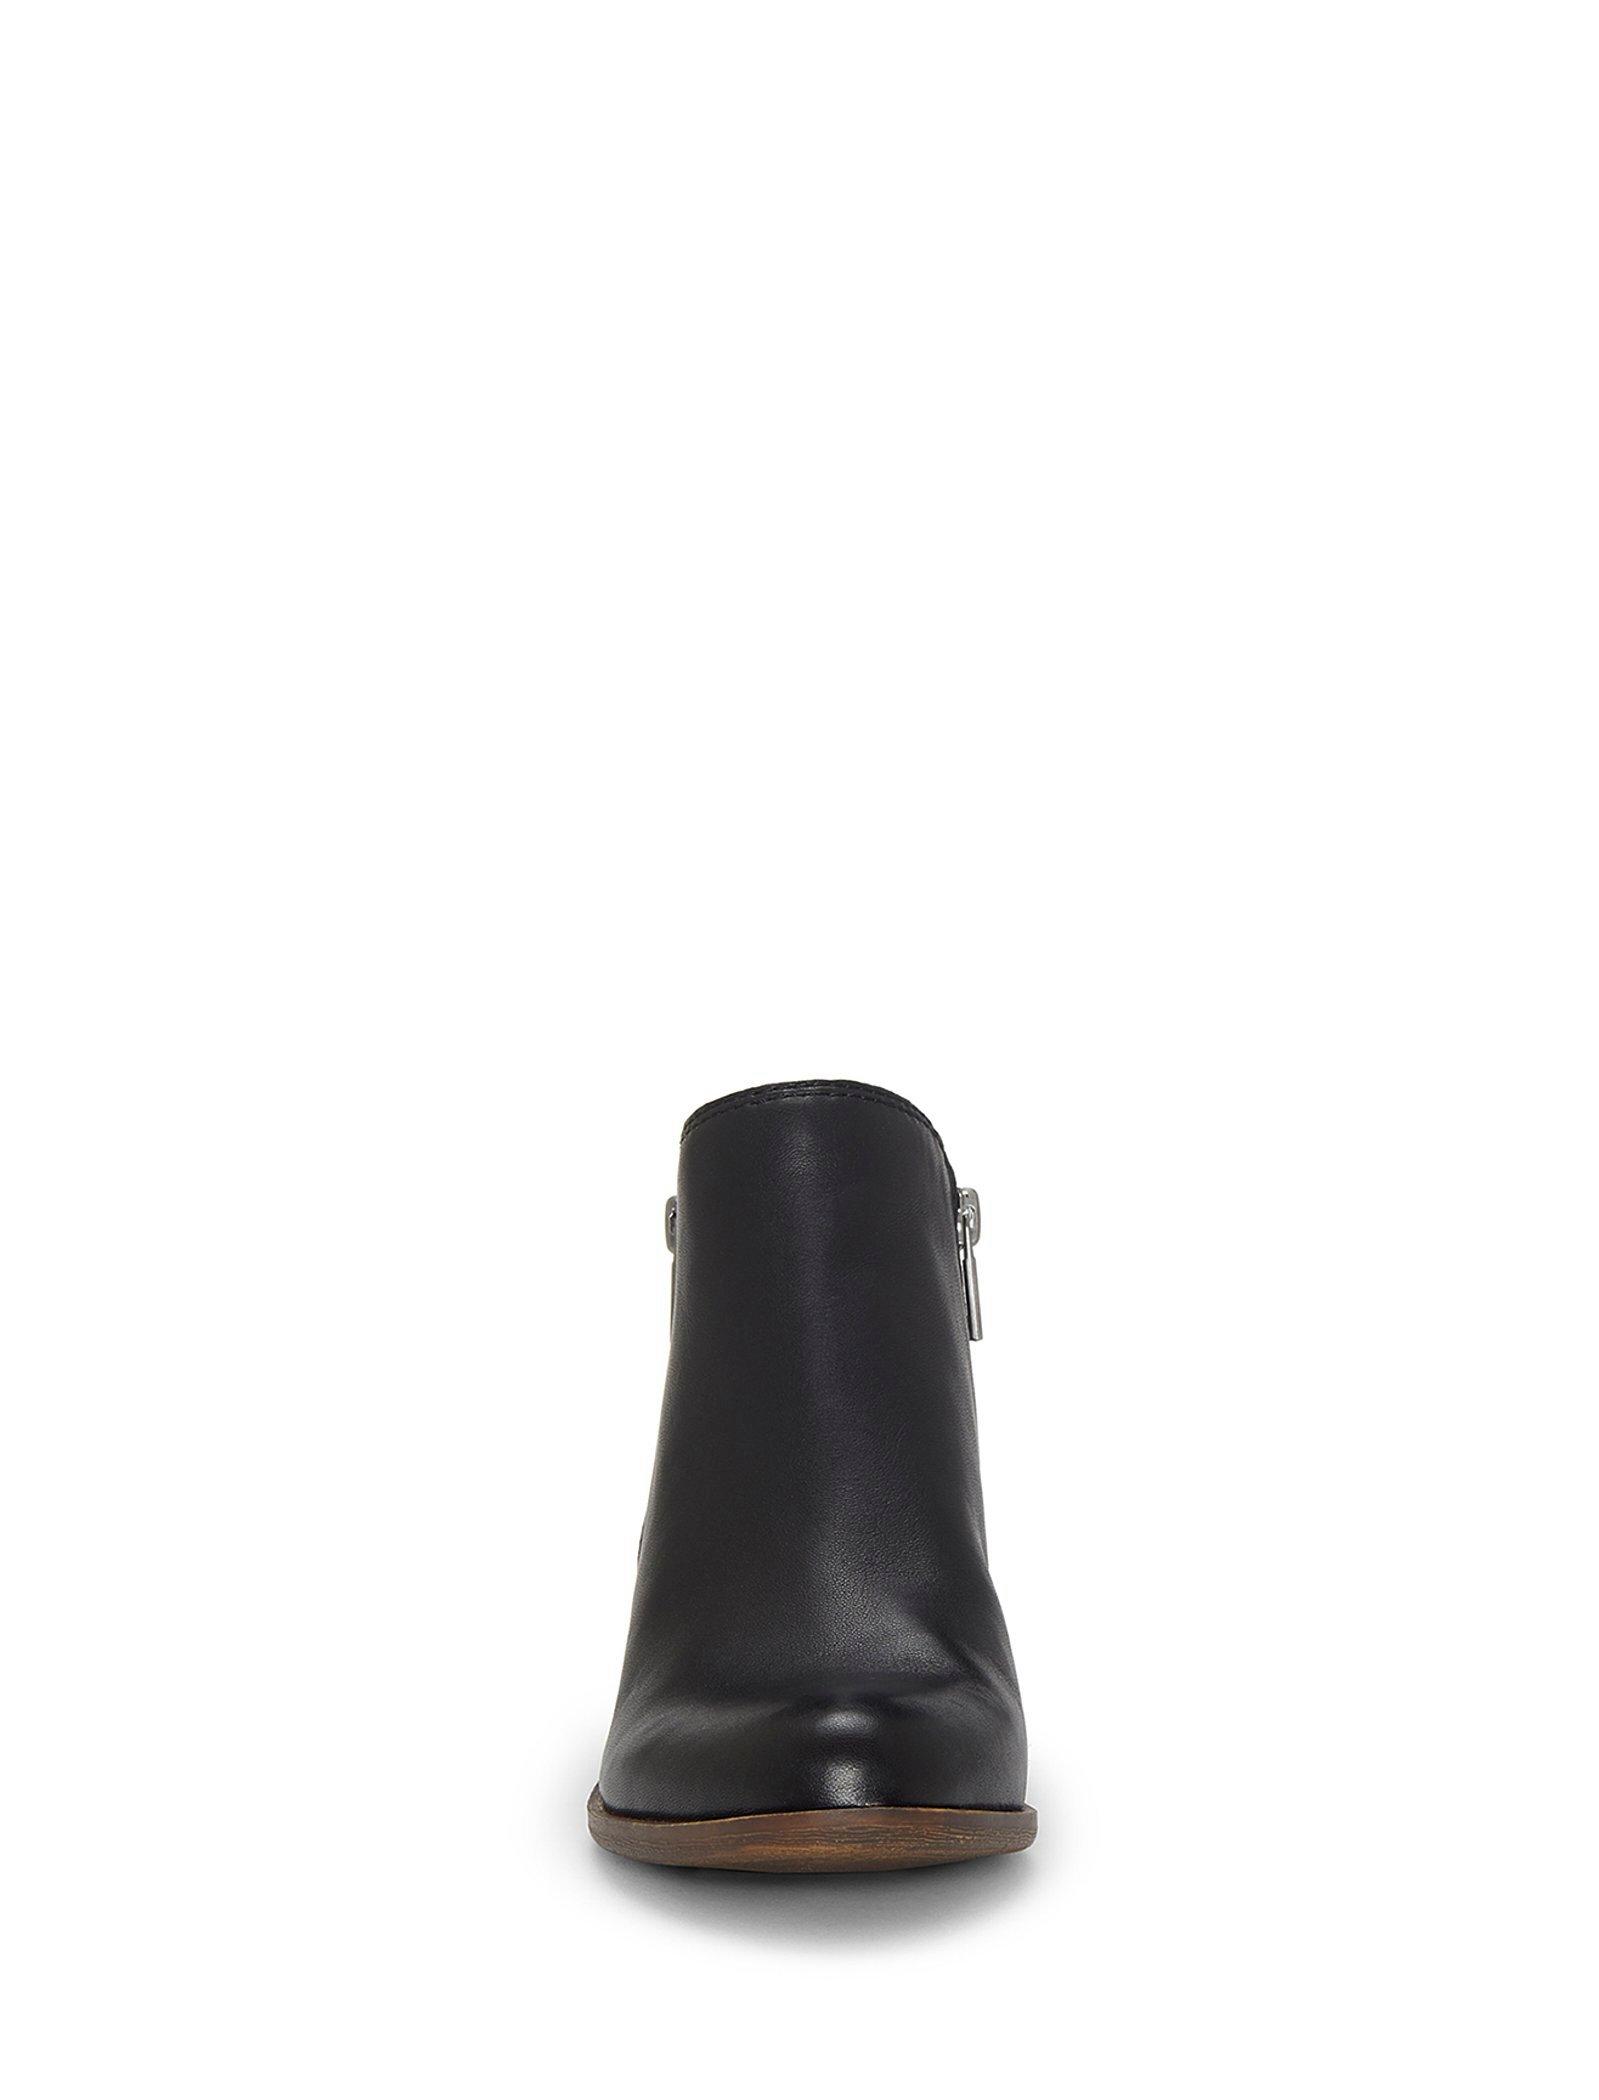 BASEL LEATHER FLAT BOOTIE, image 4